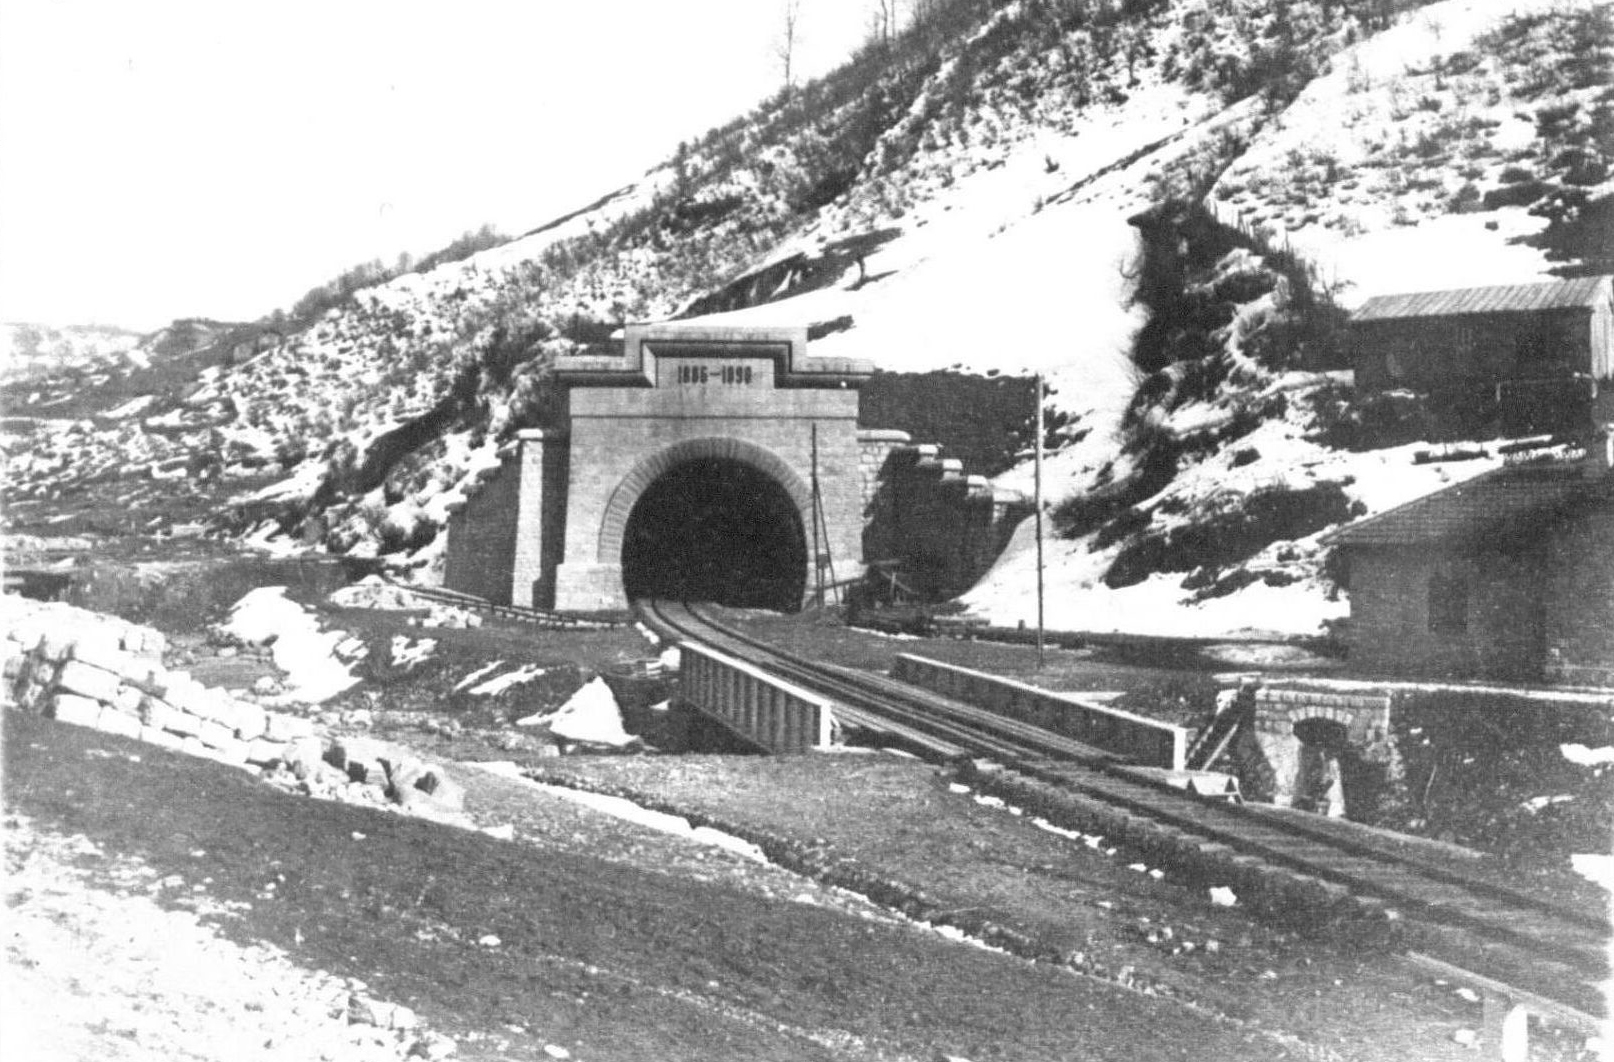 A tunnel had to be built through the Suram Pass to make it easier for the heavy tank wagons to go through the Caucasus Mountains. It is unclear exactly how the tunnel was built, but Alfred Nobel’s dynamite, for which Carl Nobel was an agent, may have been used.